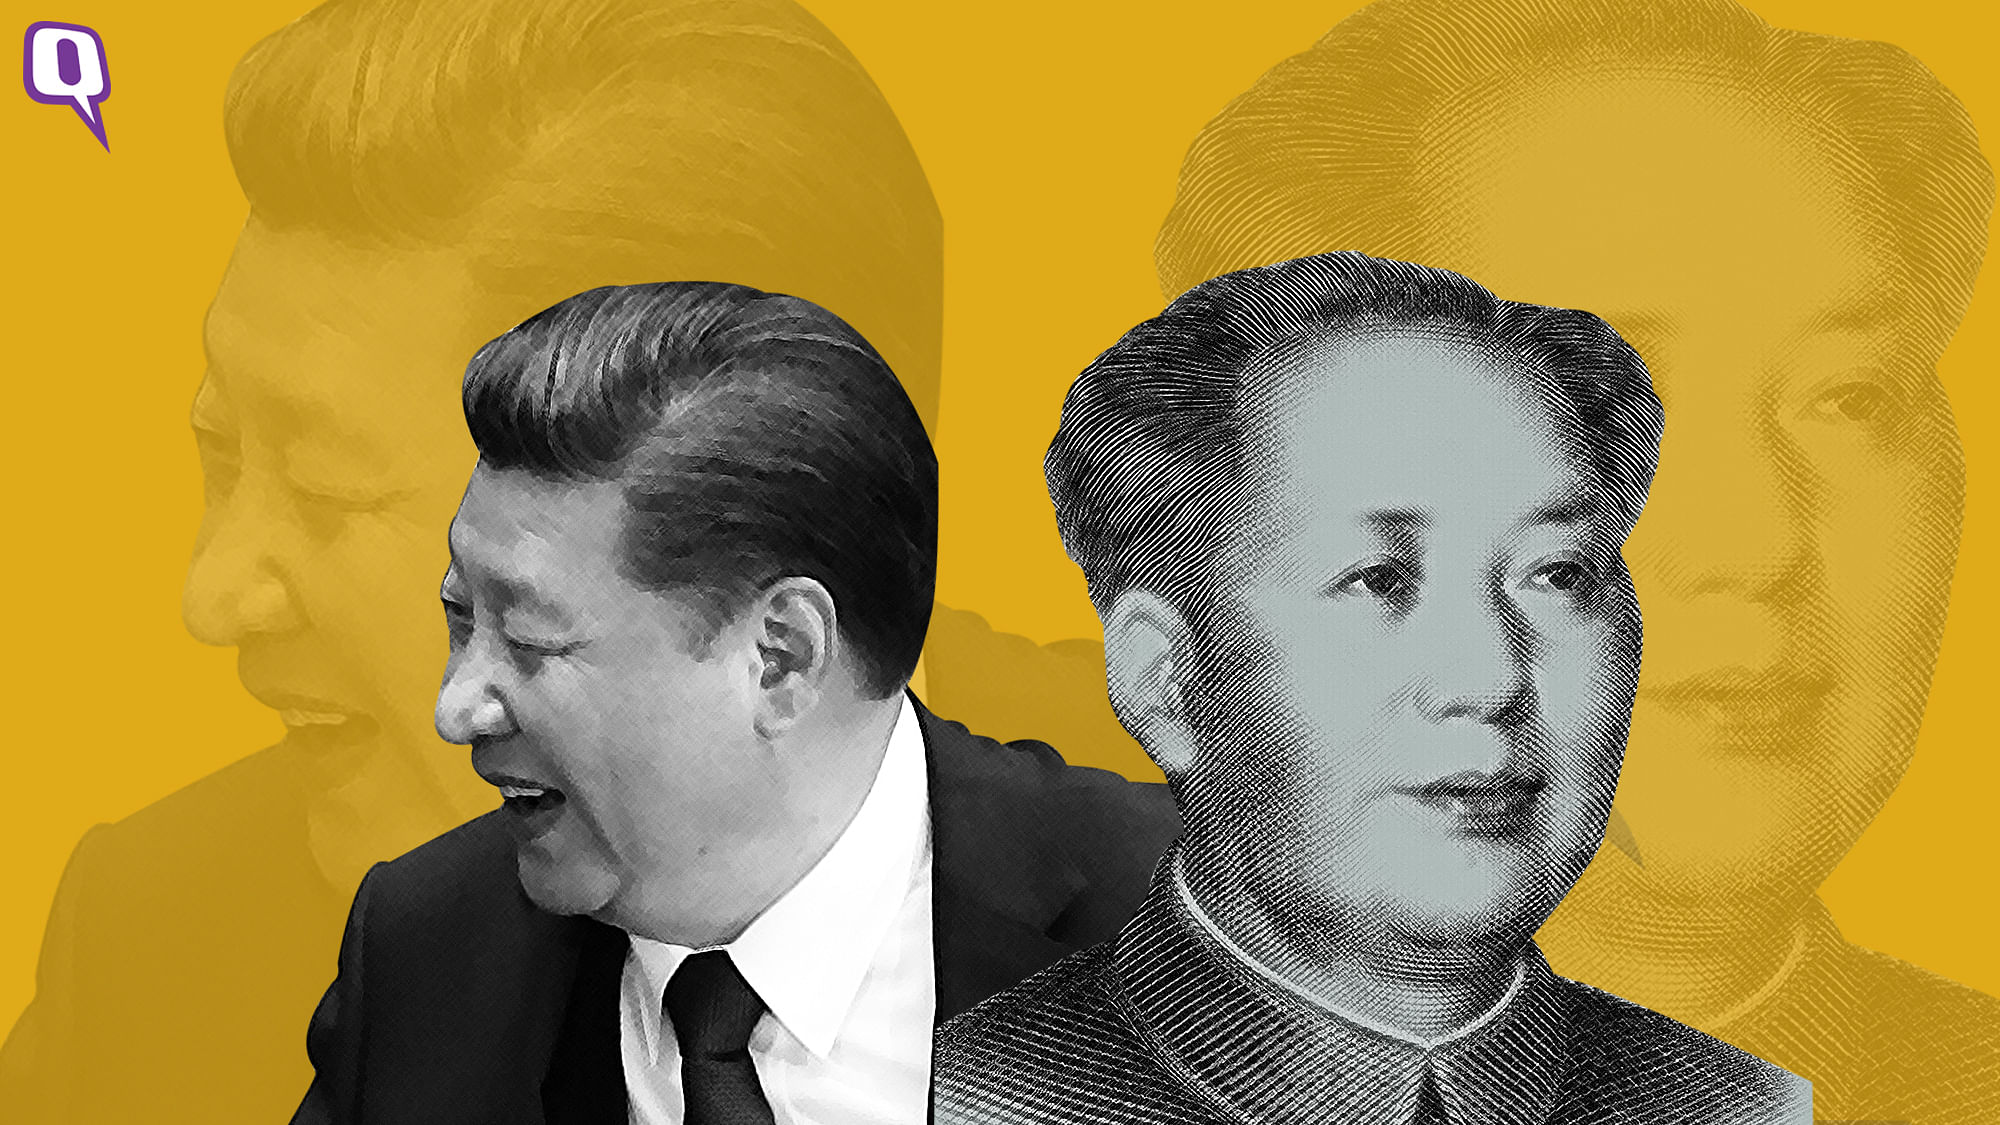 Is President Xi Jinping trying to divert attention from real issues that confront China by invoking Mao’s legacy?